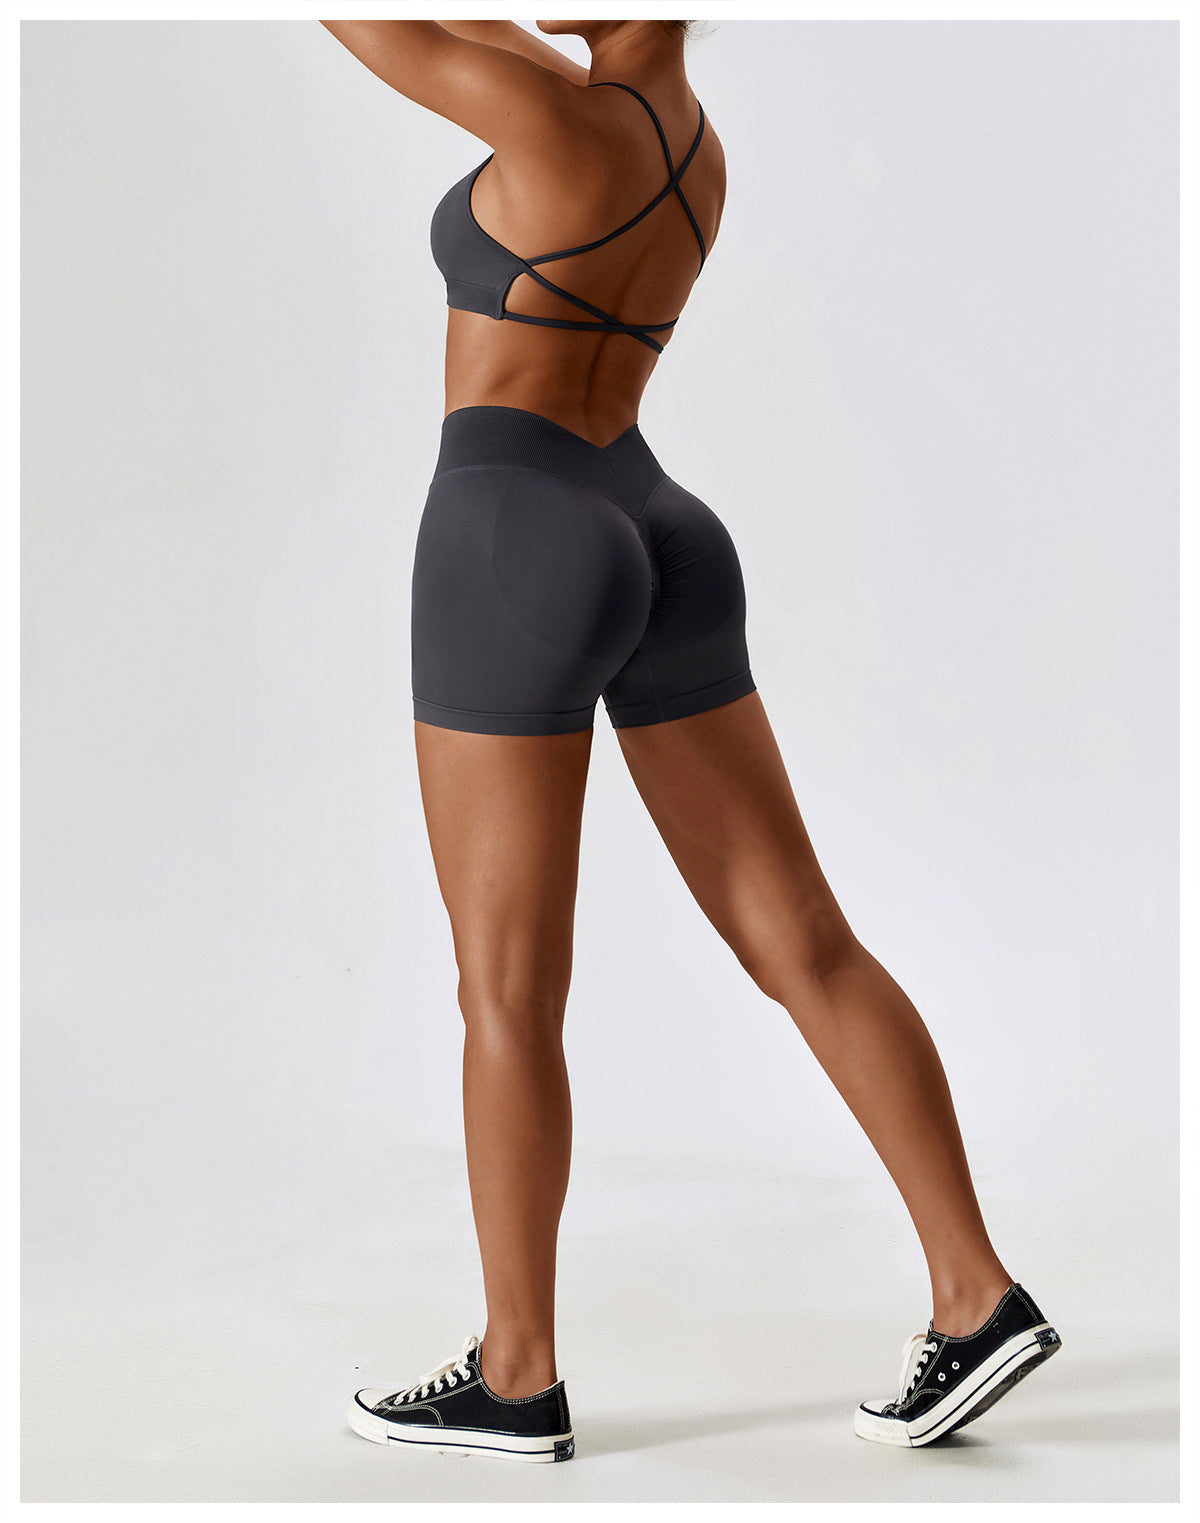 Seamless Beauty Back Yoga Clothes Running Quick-drying Tight Sports Fitness Clothes Suit Women